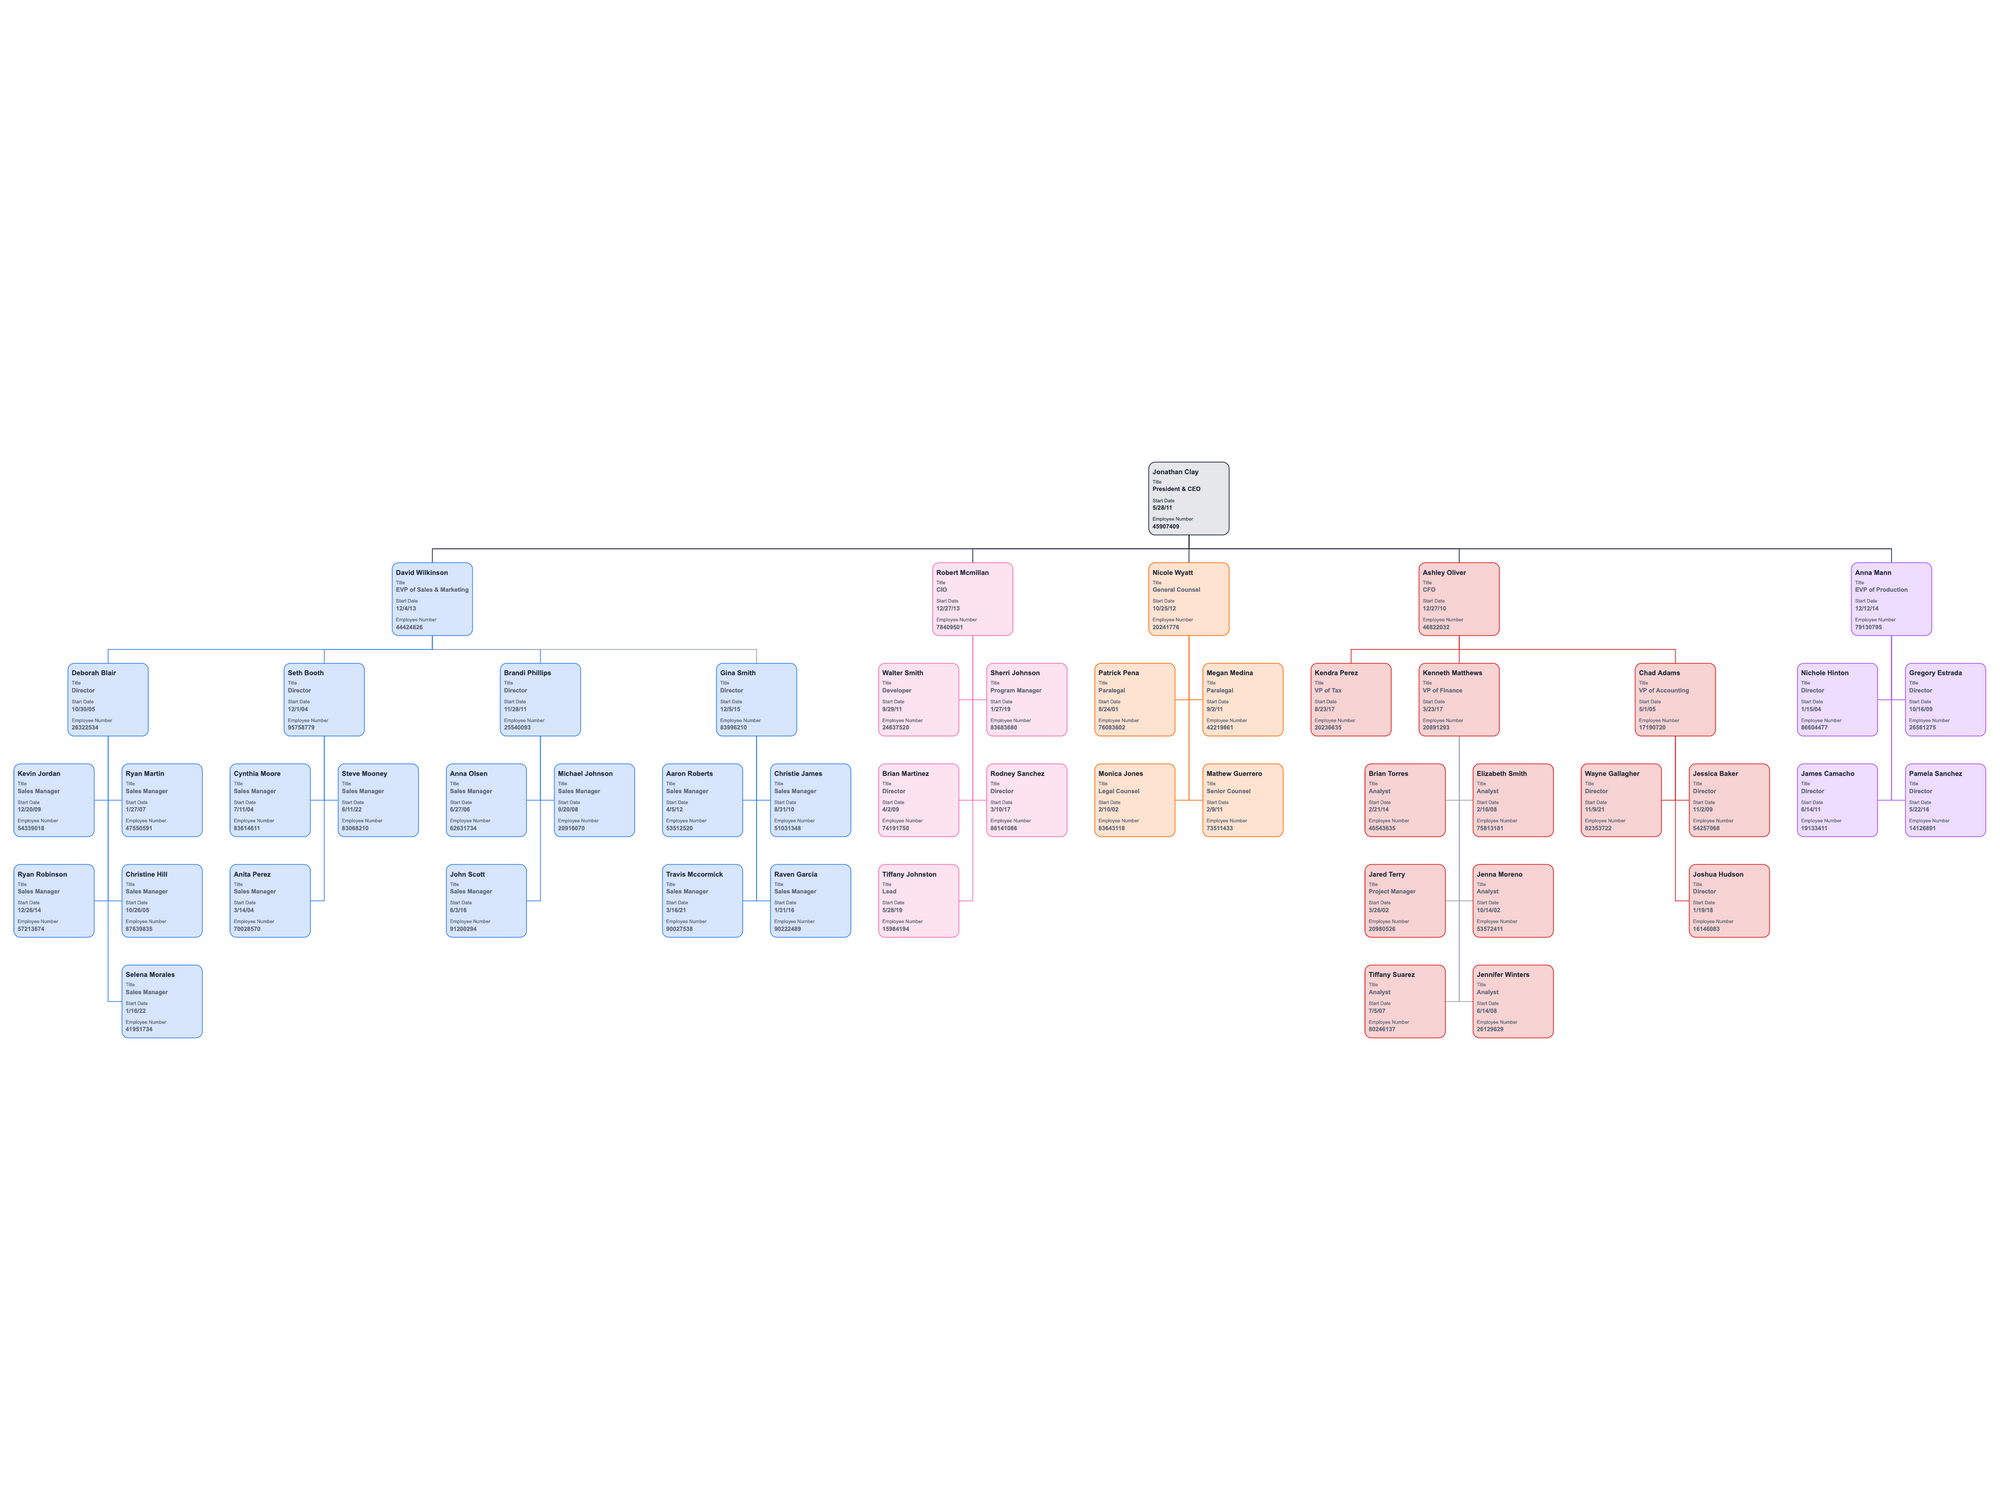 Automatic organizational chart from Excel employee data